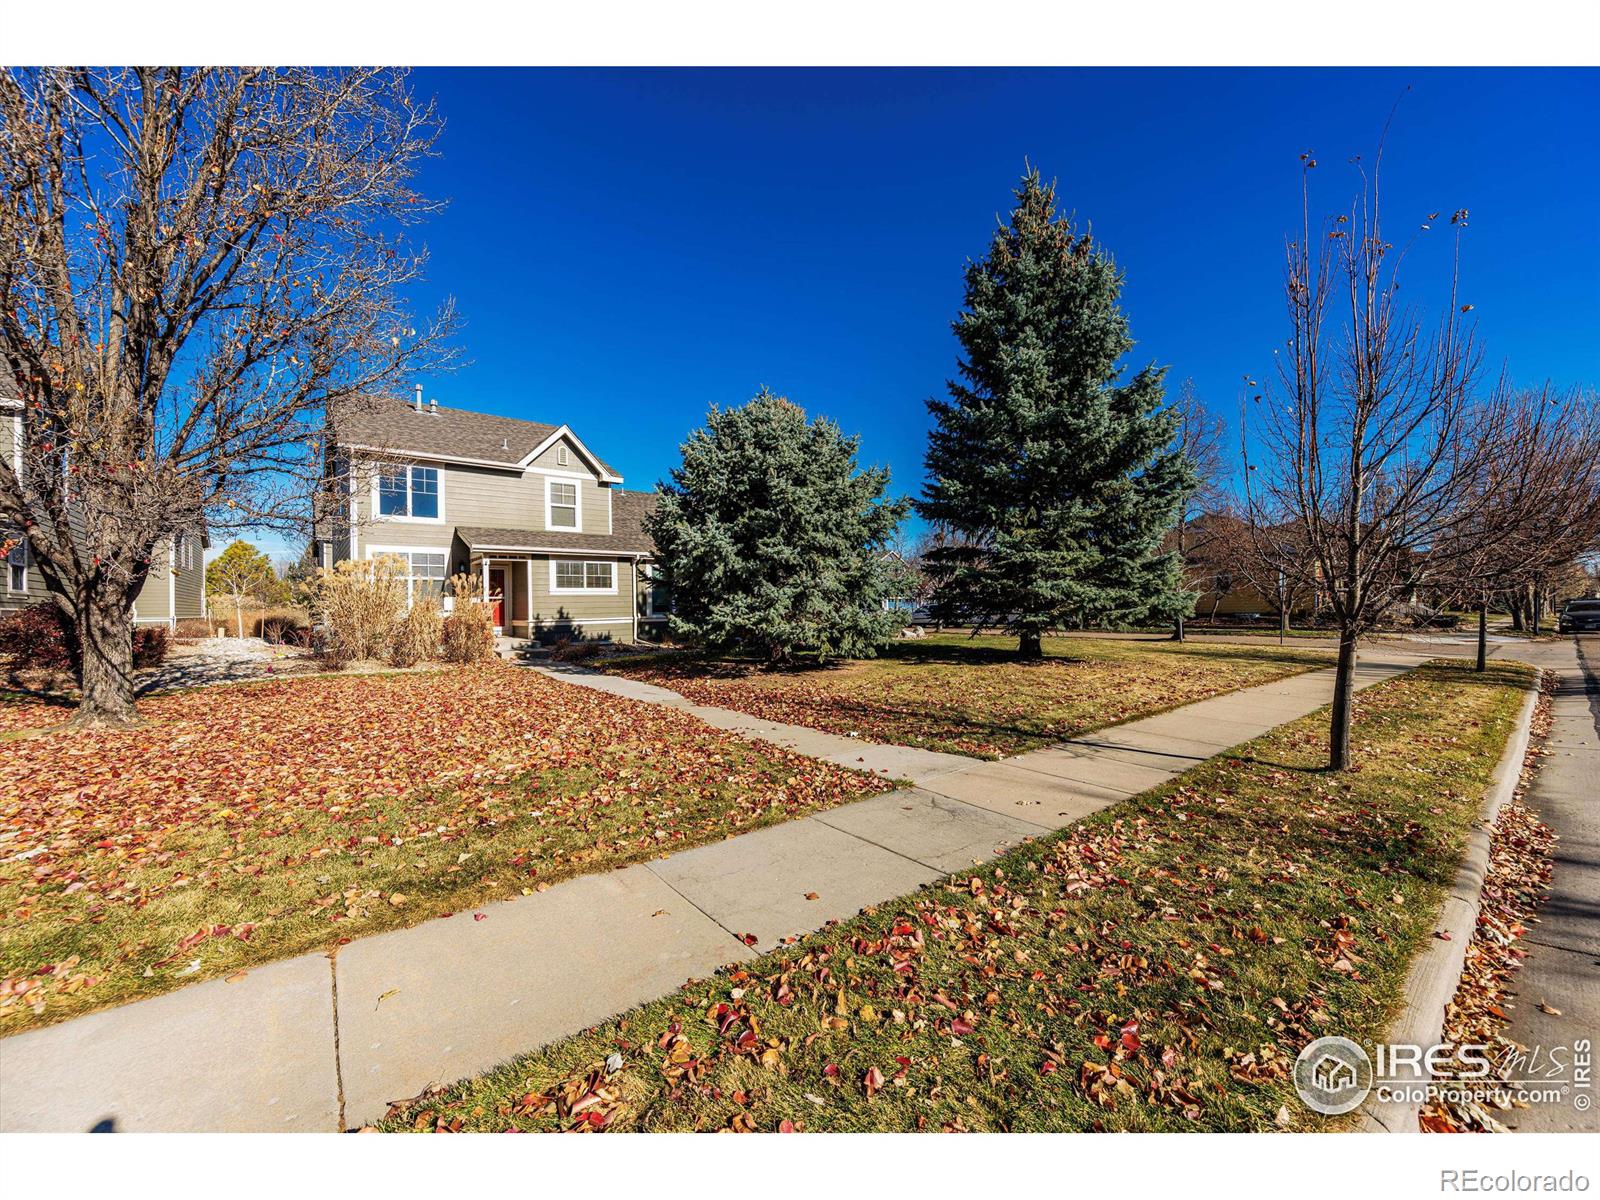 2756  county fair lane, fort collins sold home. Closed on 2024-02-08 for $435,000.